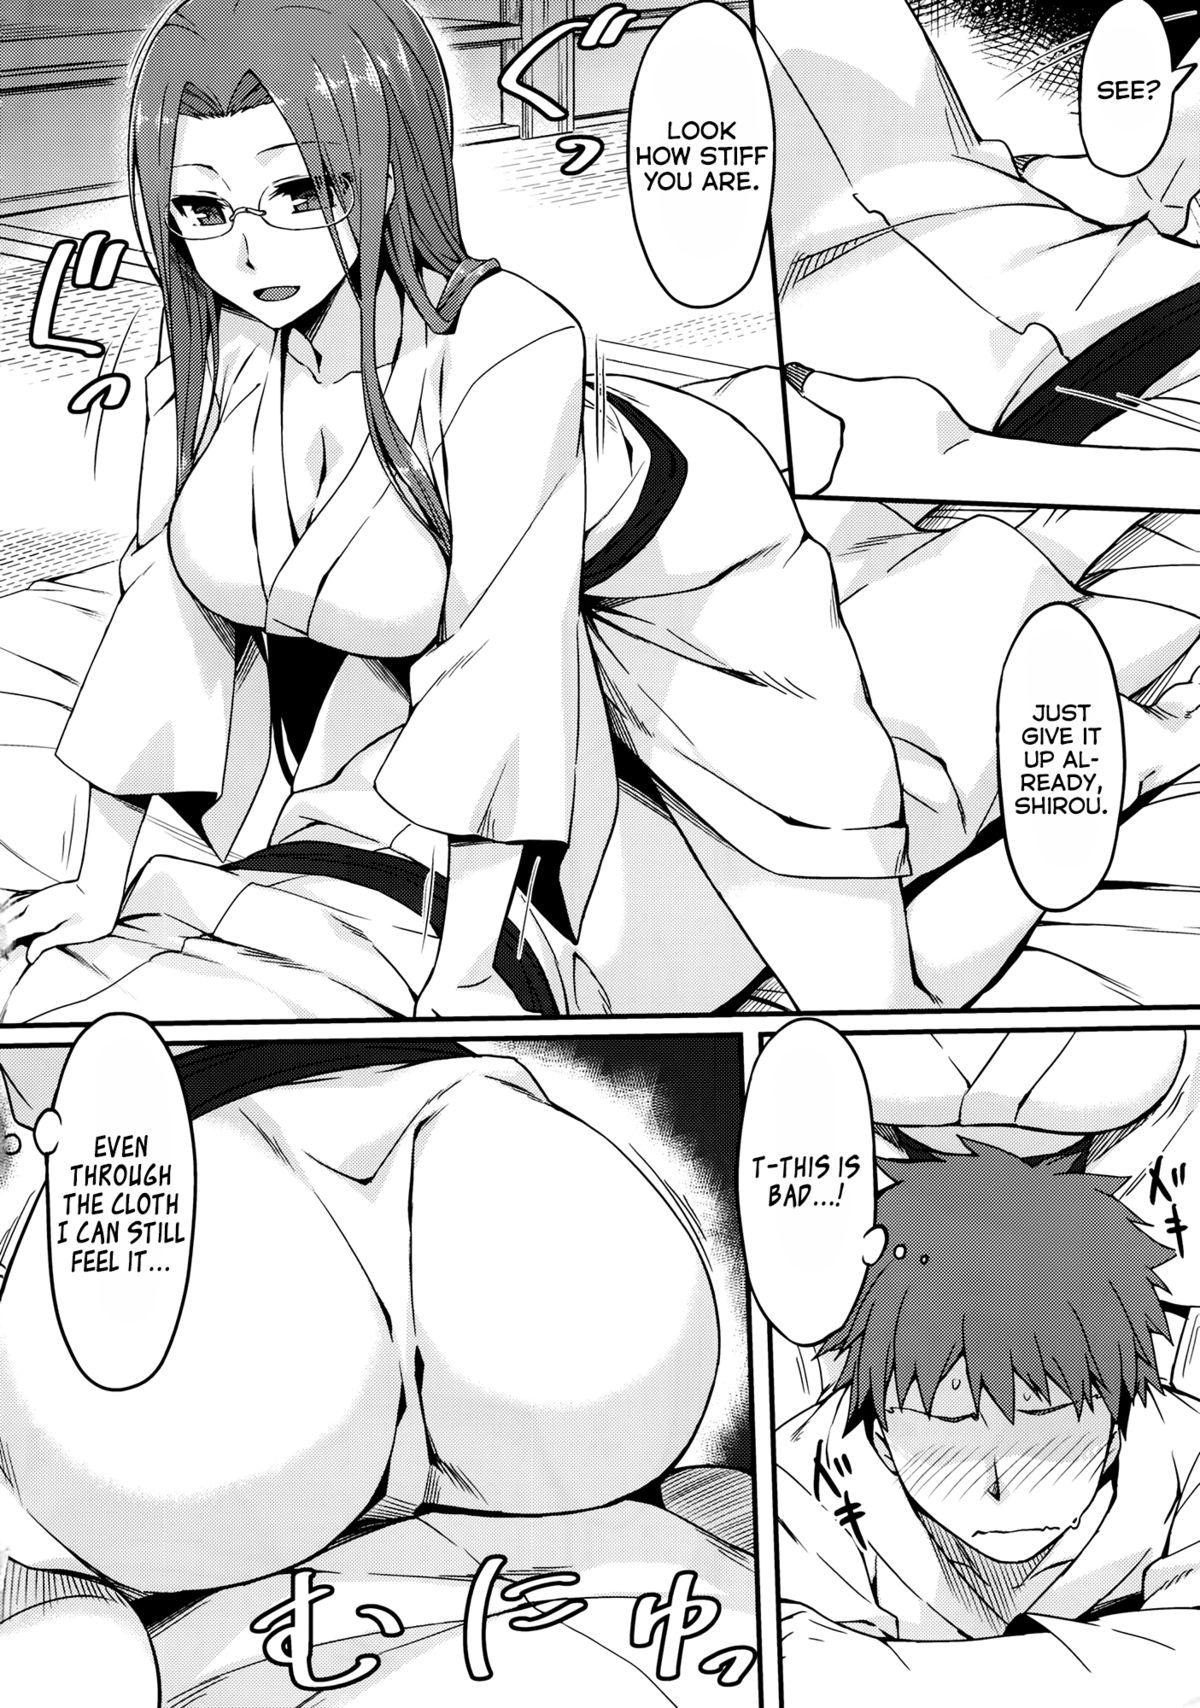 Free 18 Year Old Porn (C88) [S.S.L (Yanagi)] Rider-san to Onsen Yado. Sonogo | Hot Spring Inn With Rider-san. After Story (Fate/stay night) [English] [Facedesk] - Fate stay night Big breasts - Page 4